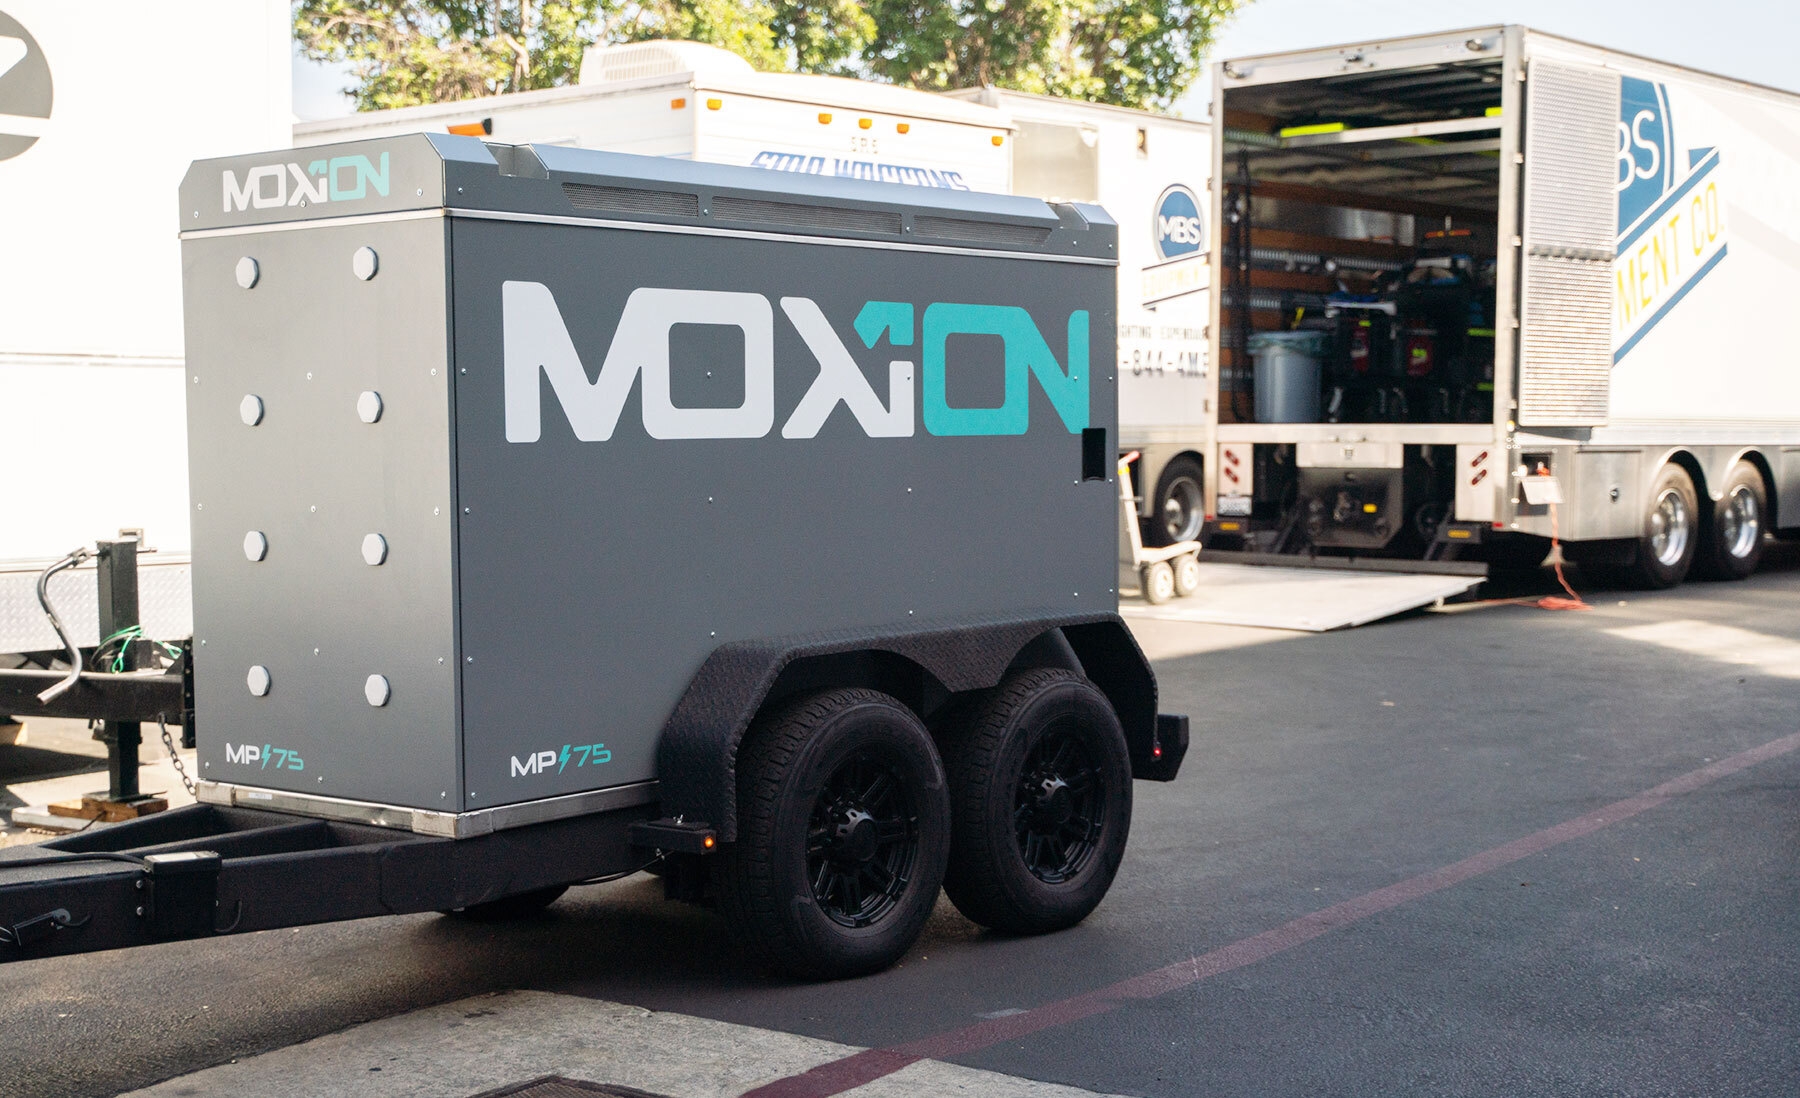 A small, gray trailer with the Moxion Power logo, situated in a parking lot in front of other larger trailers